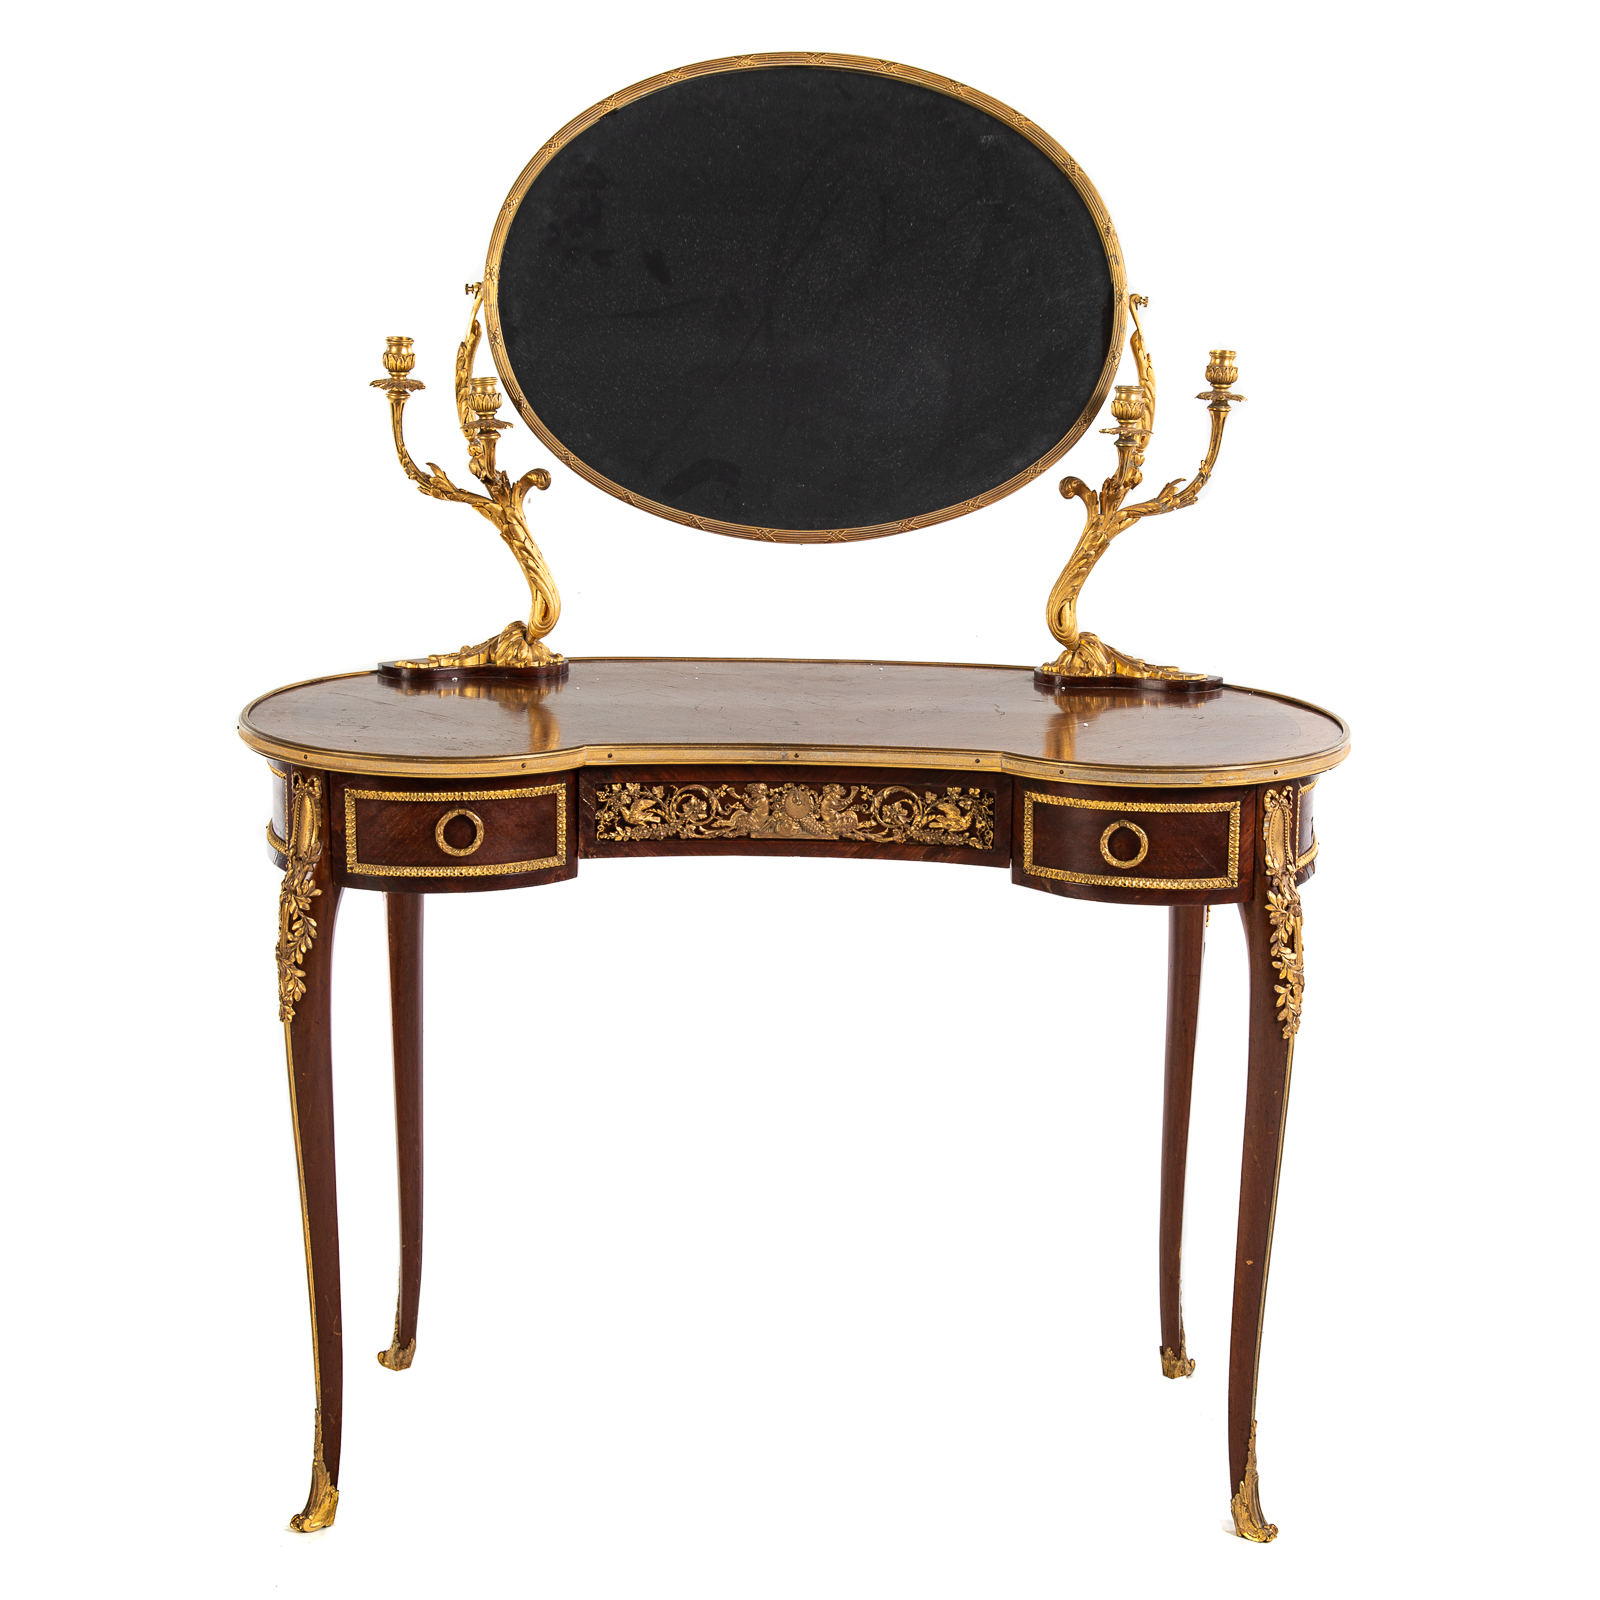 LOUIS XVI STYLE VANITY TABLE First